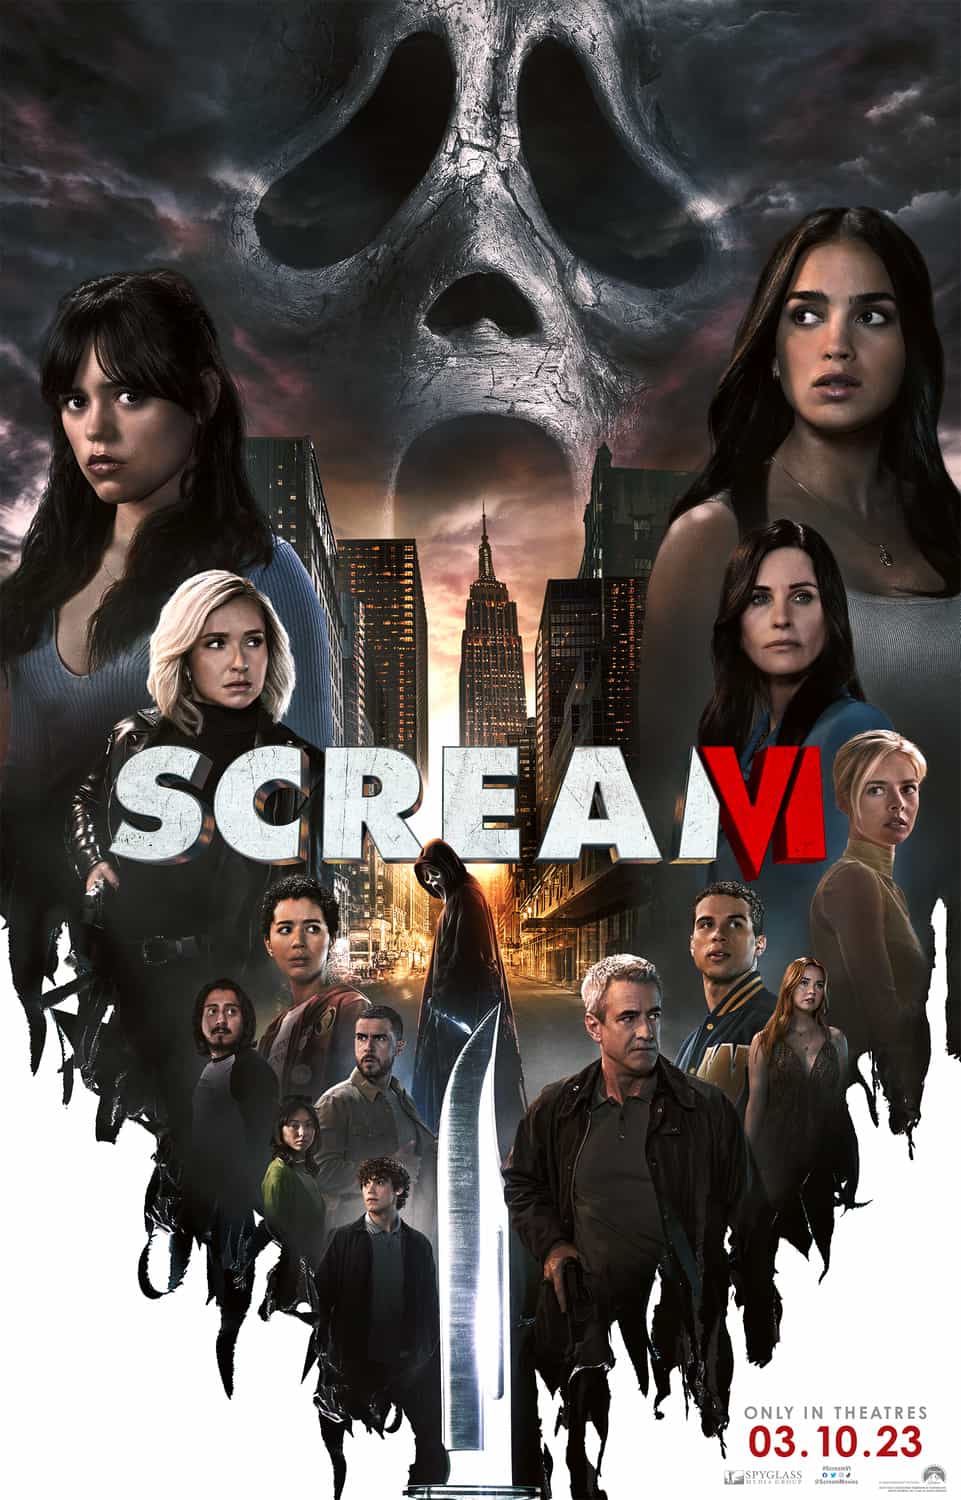 UK Box Office Weekend Report 10th - 12th March 2023:  Scream 6 is the top new movie and makes its debut with £3 Million over the weekend